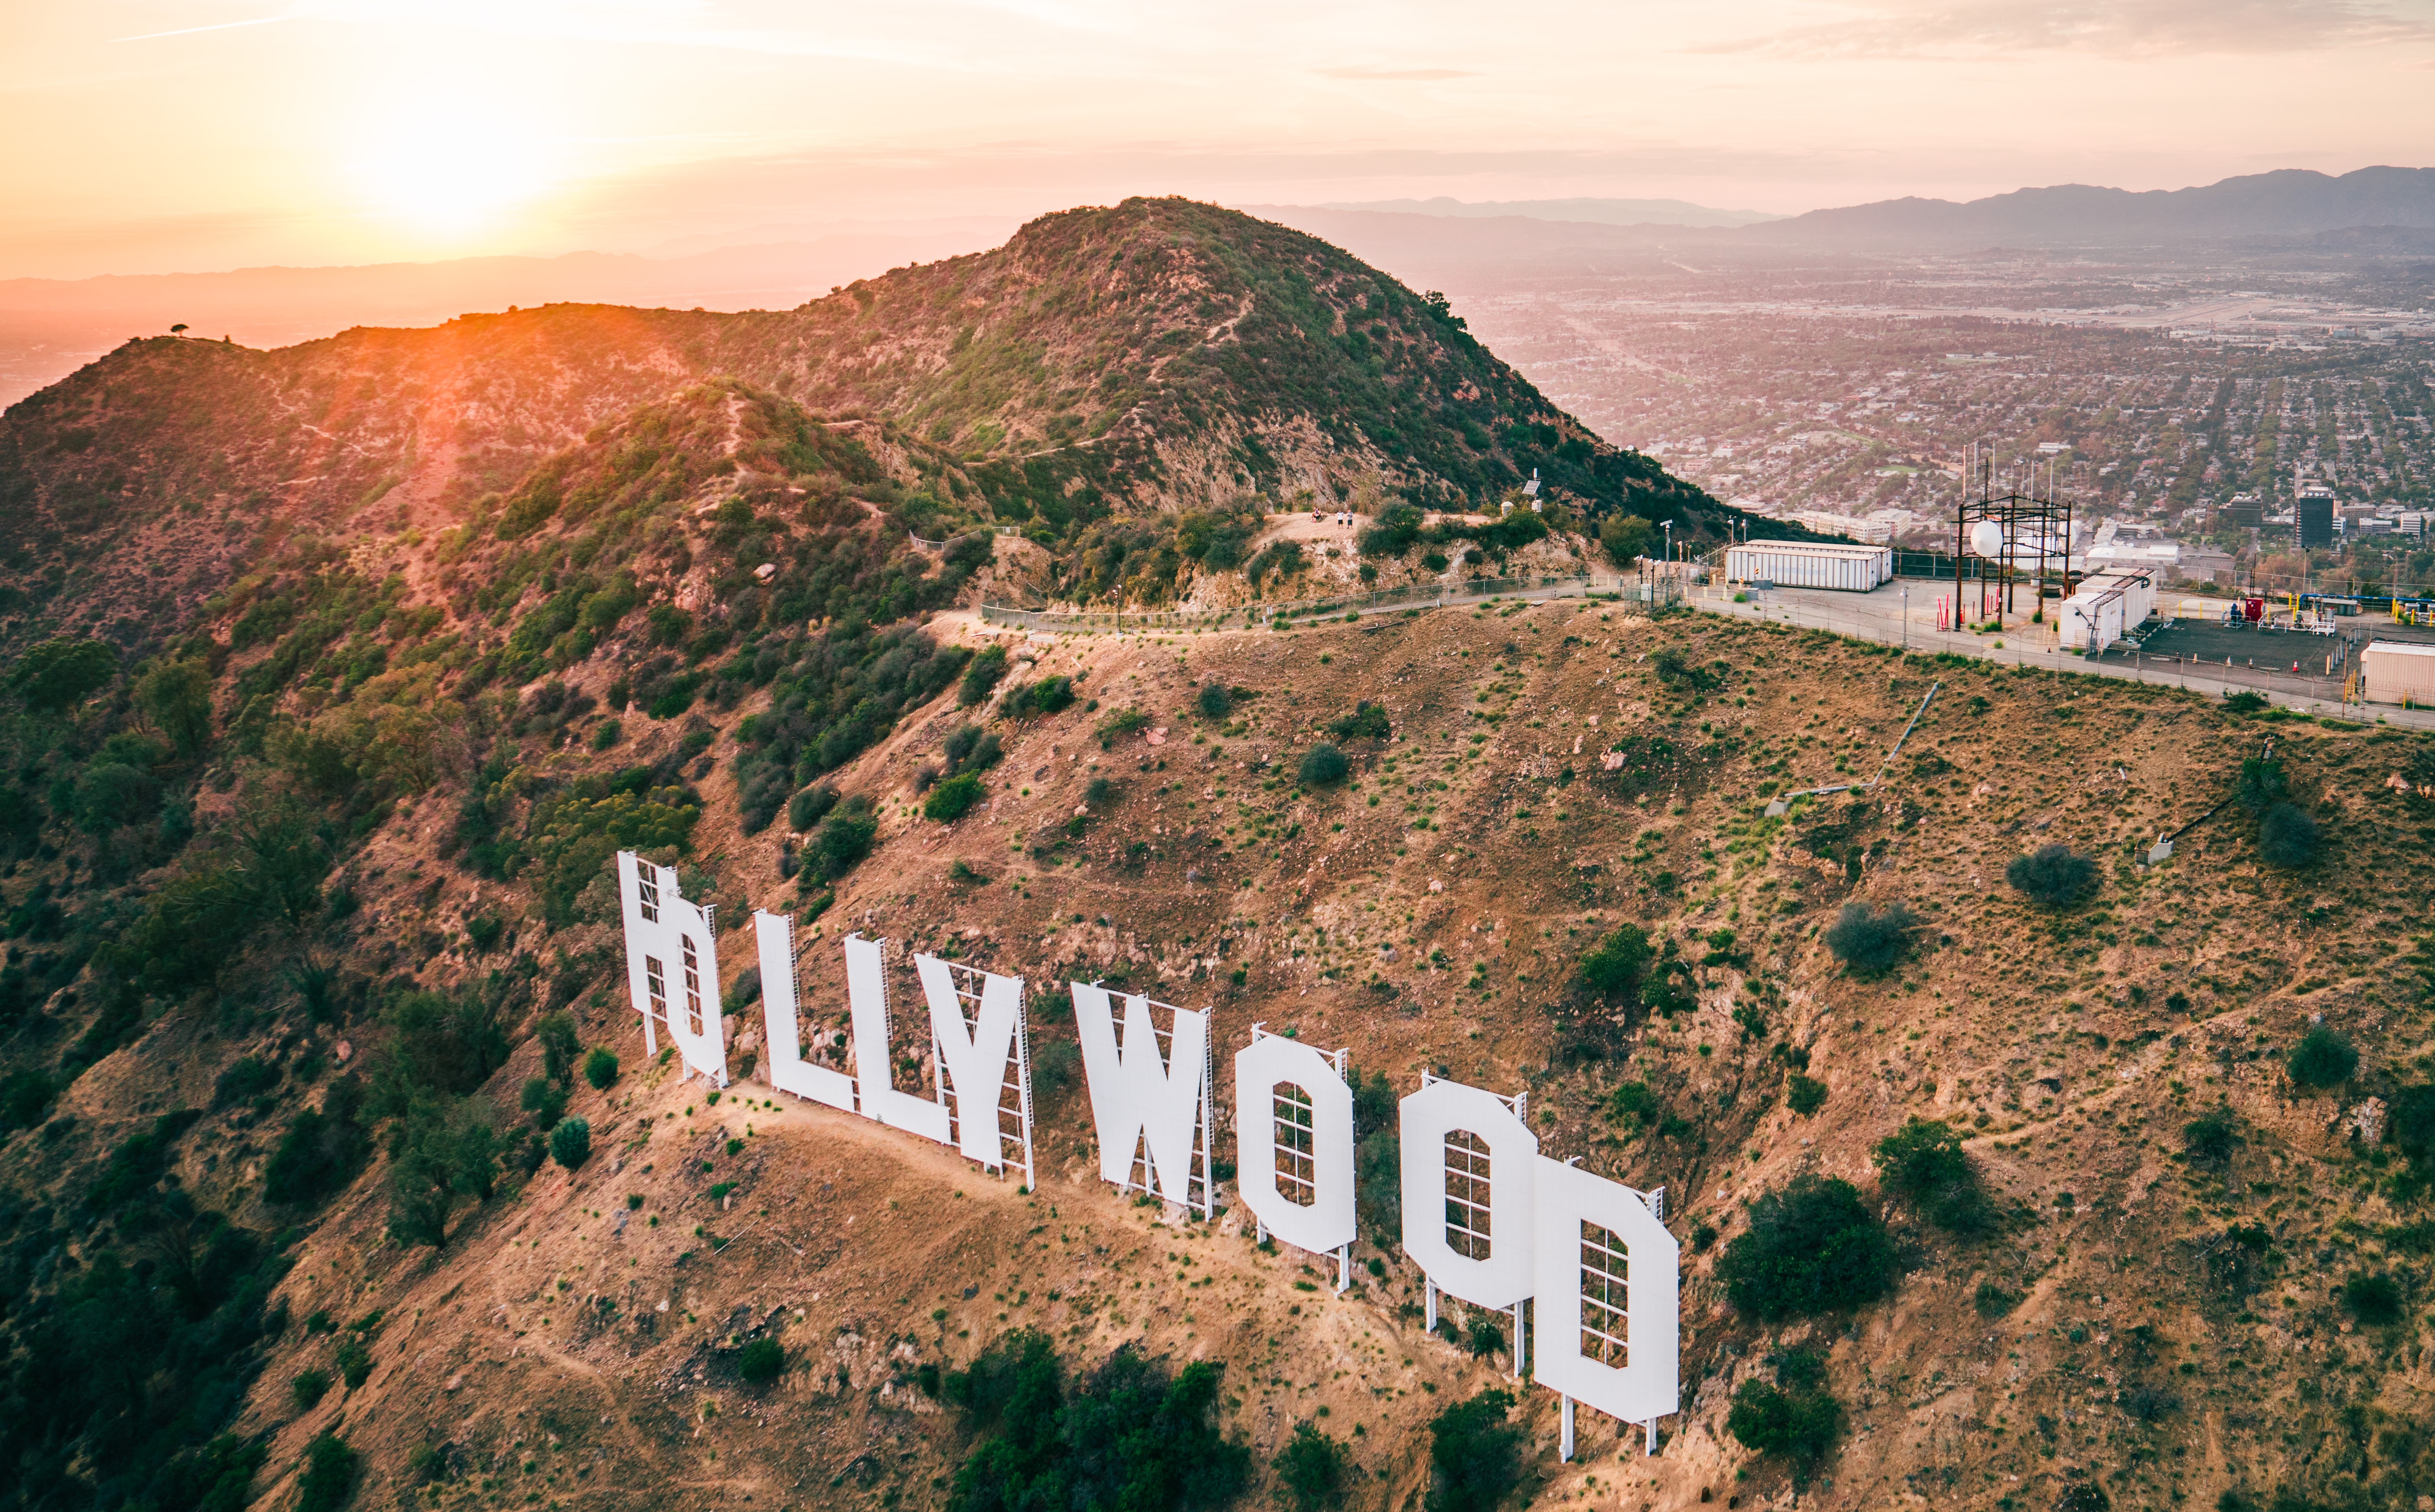 22 Best Things to Do in Hollywood for Both Tourists and Locals